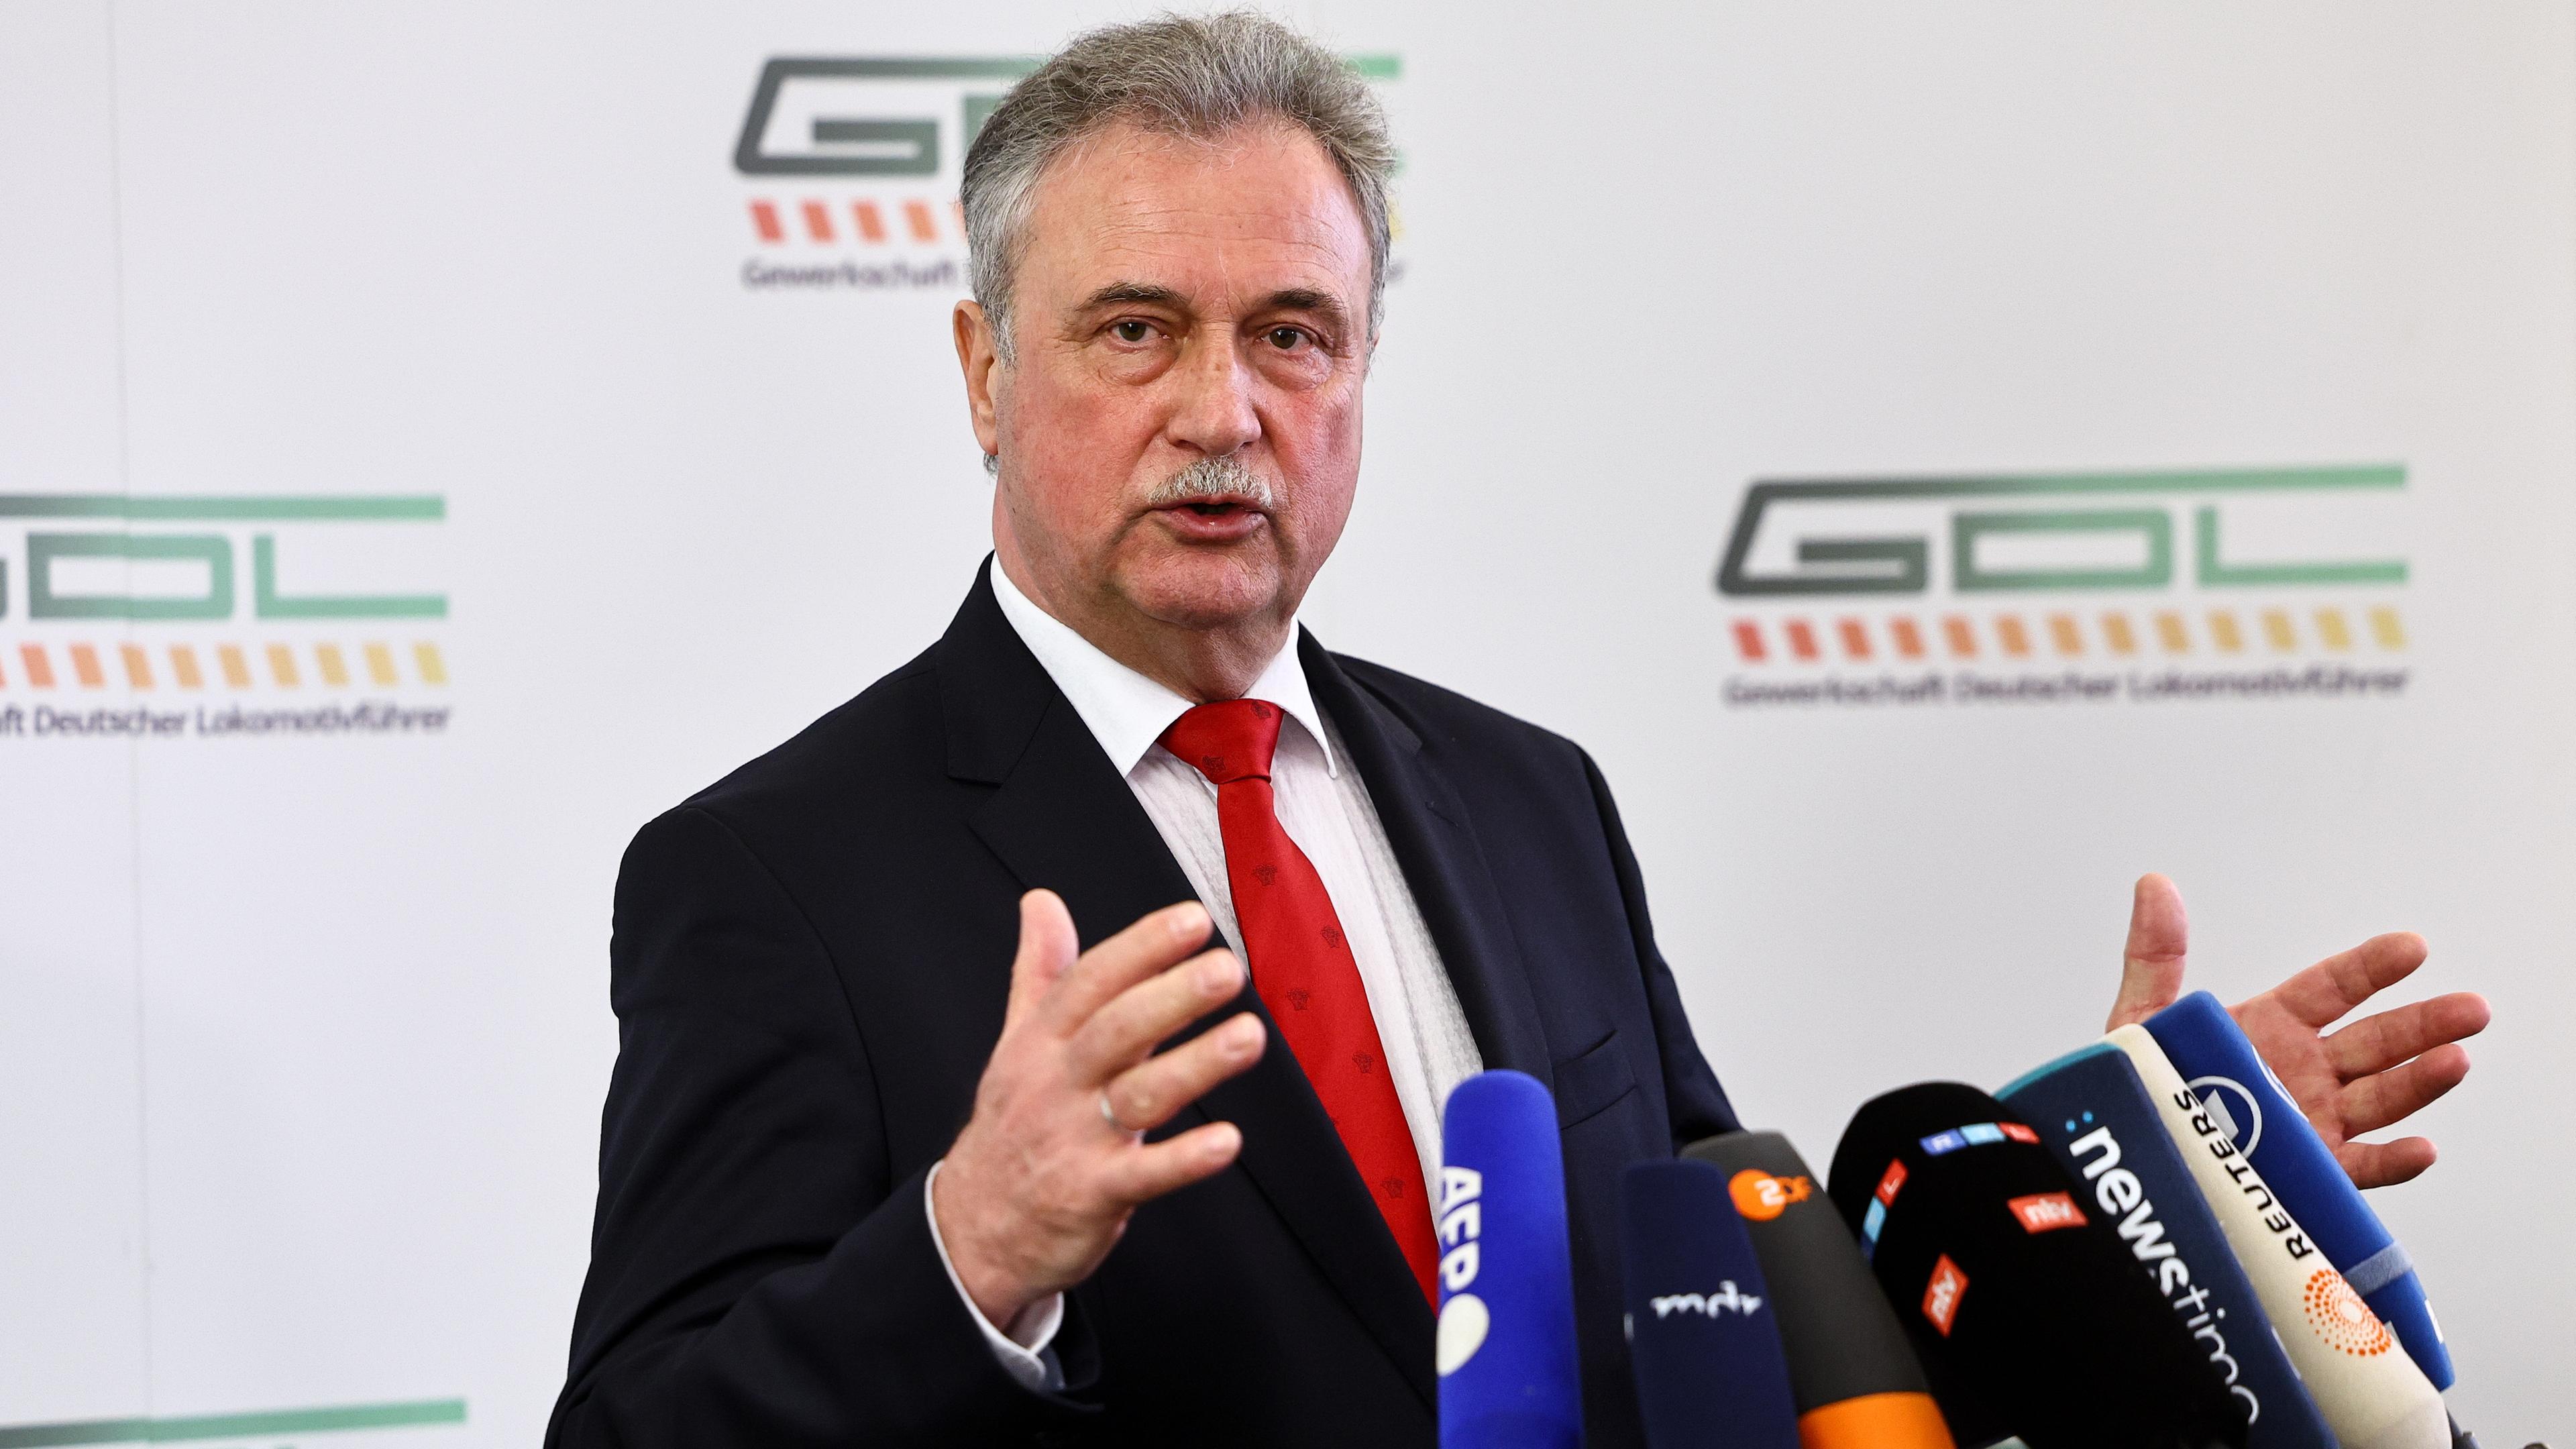 Chairman of the German train drivers' union (GDL) Claus Weselsky attends a news conference to announce a new wage deal in Berlin, Germany, 26 March 2024. The German GDL train drivers' trade union made a pay deal with Deutsche Bahn after months of strikes that restricted rail traffic in Germany